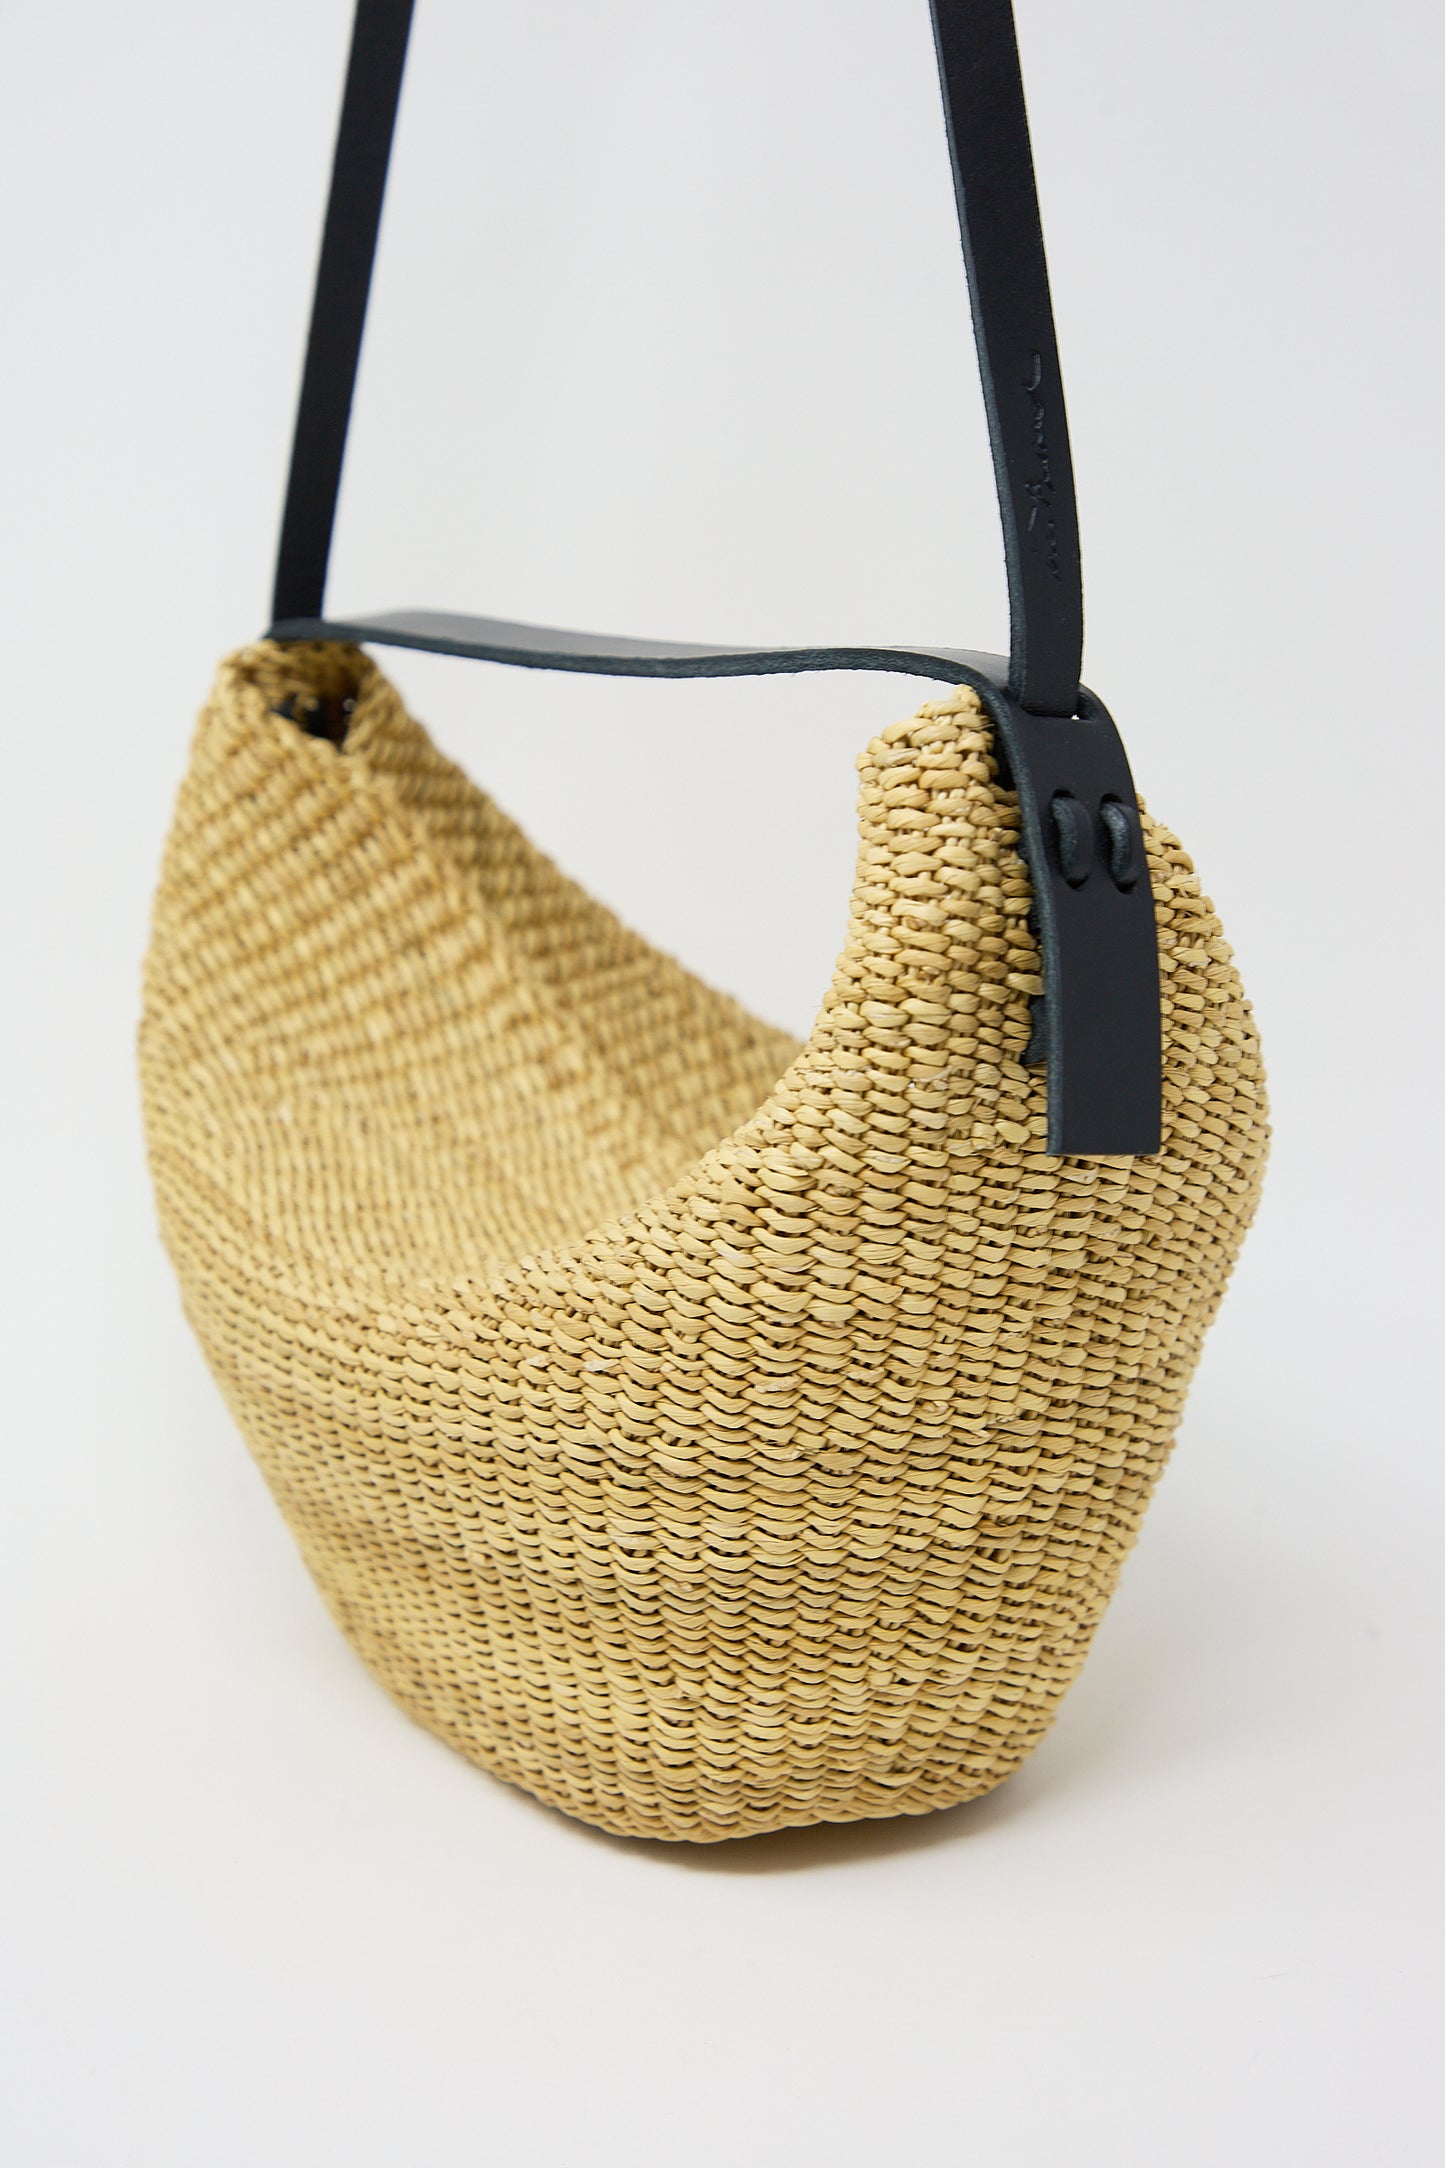 Handwoven beige N. 35 Mini Croissant Bag in Natural with black strap on a white background by Inès Bressand.